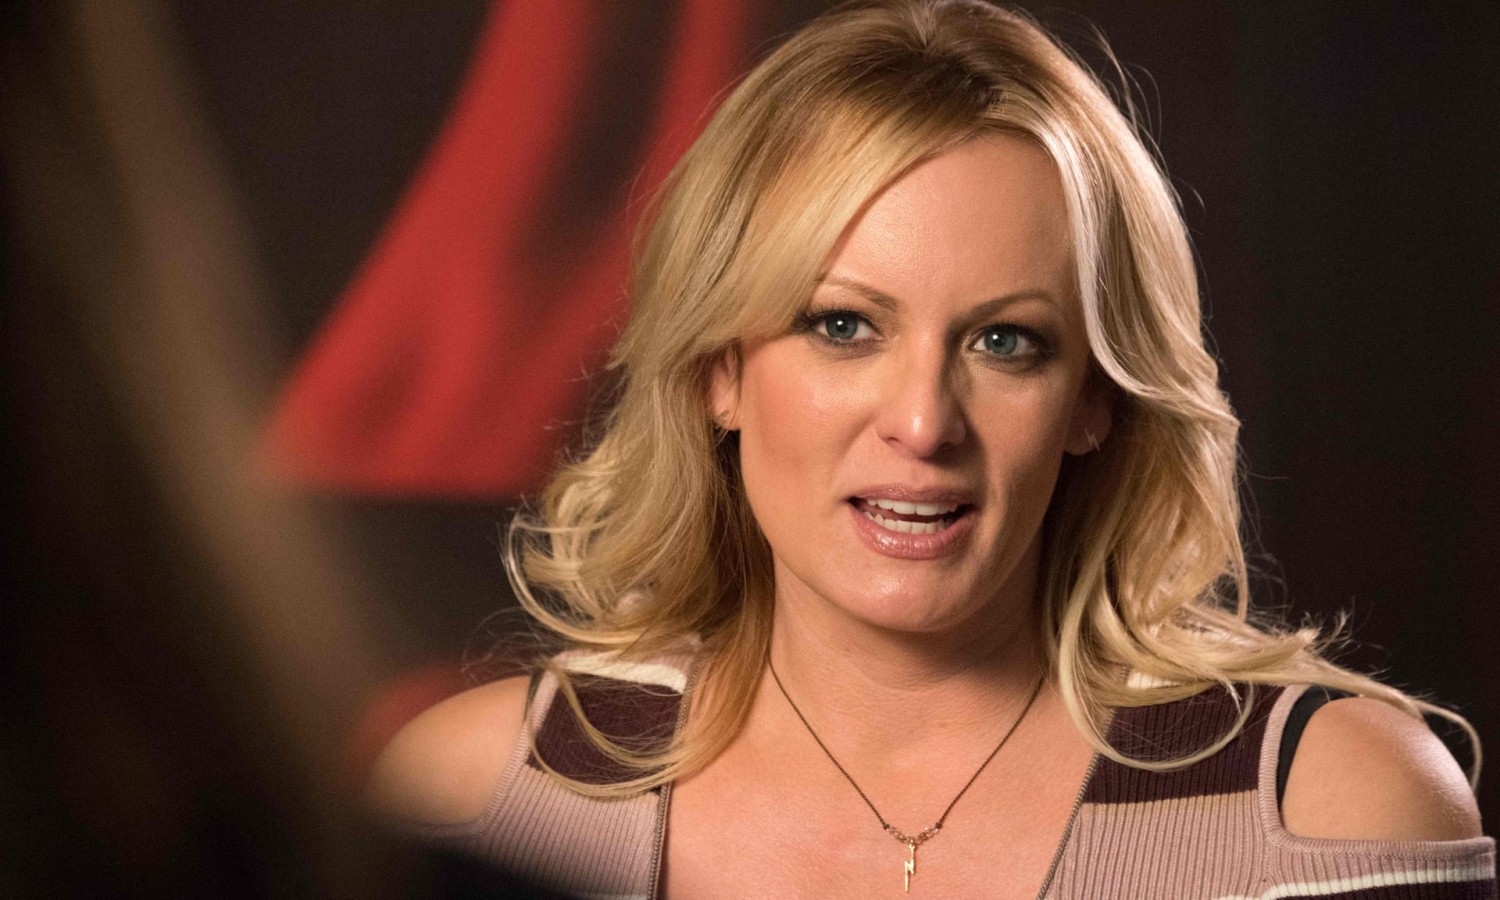 Stormy Daniels talks about Trump and 'the worst 90 seconds of my life' on standup tour